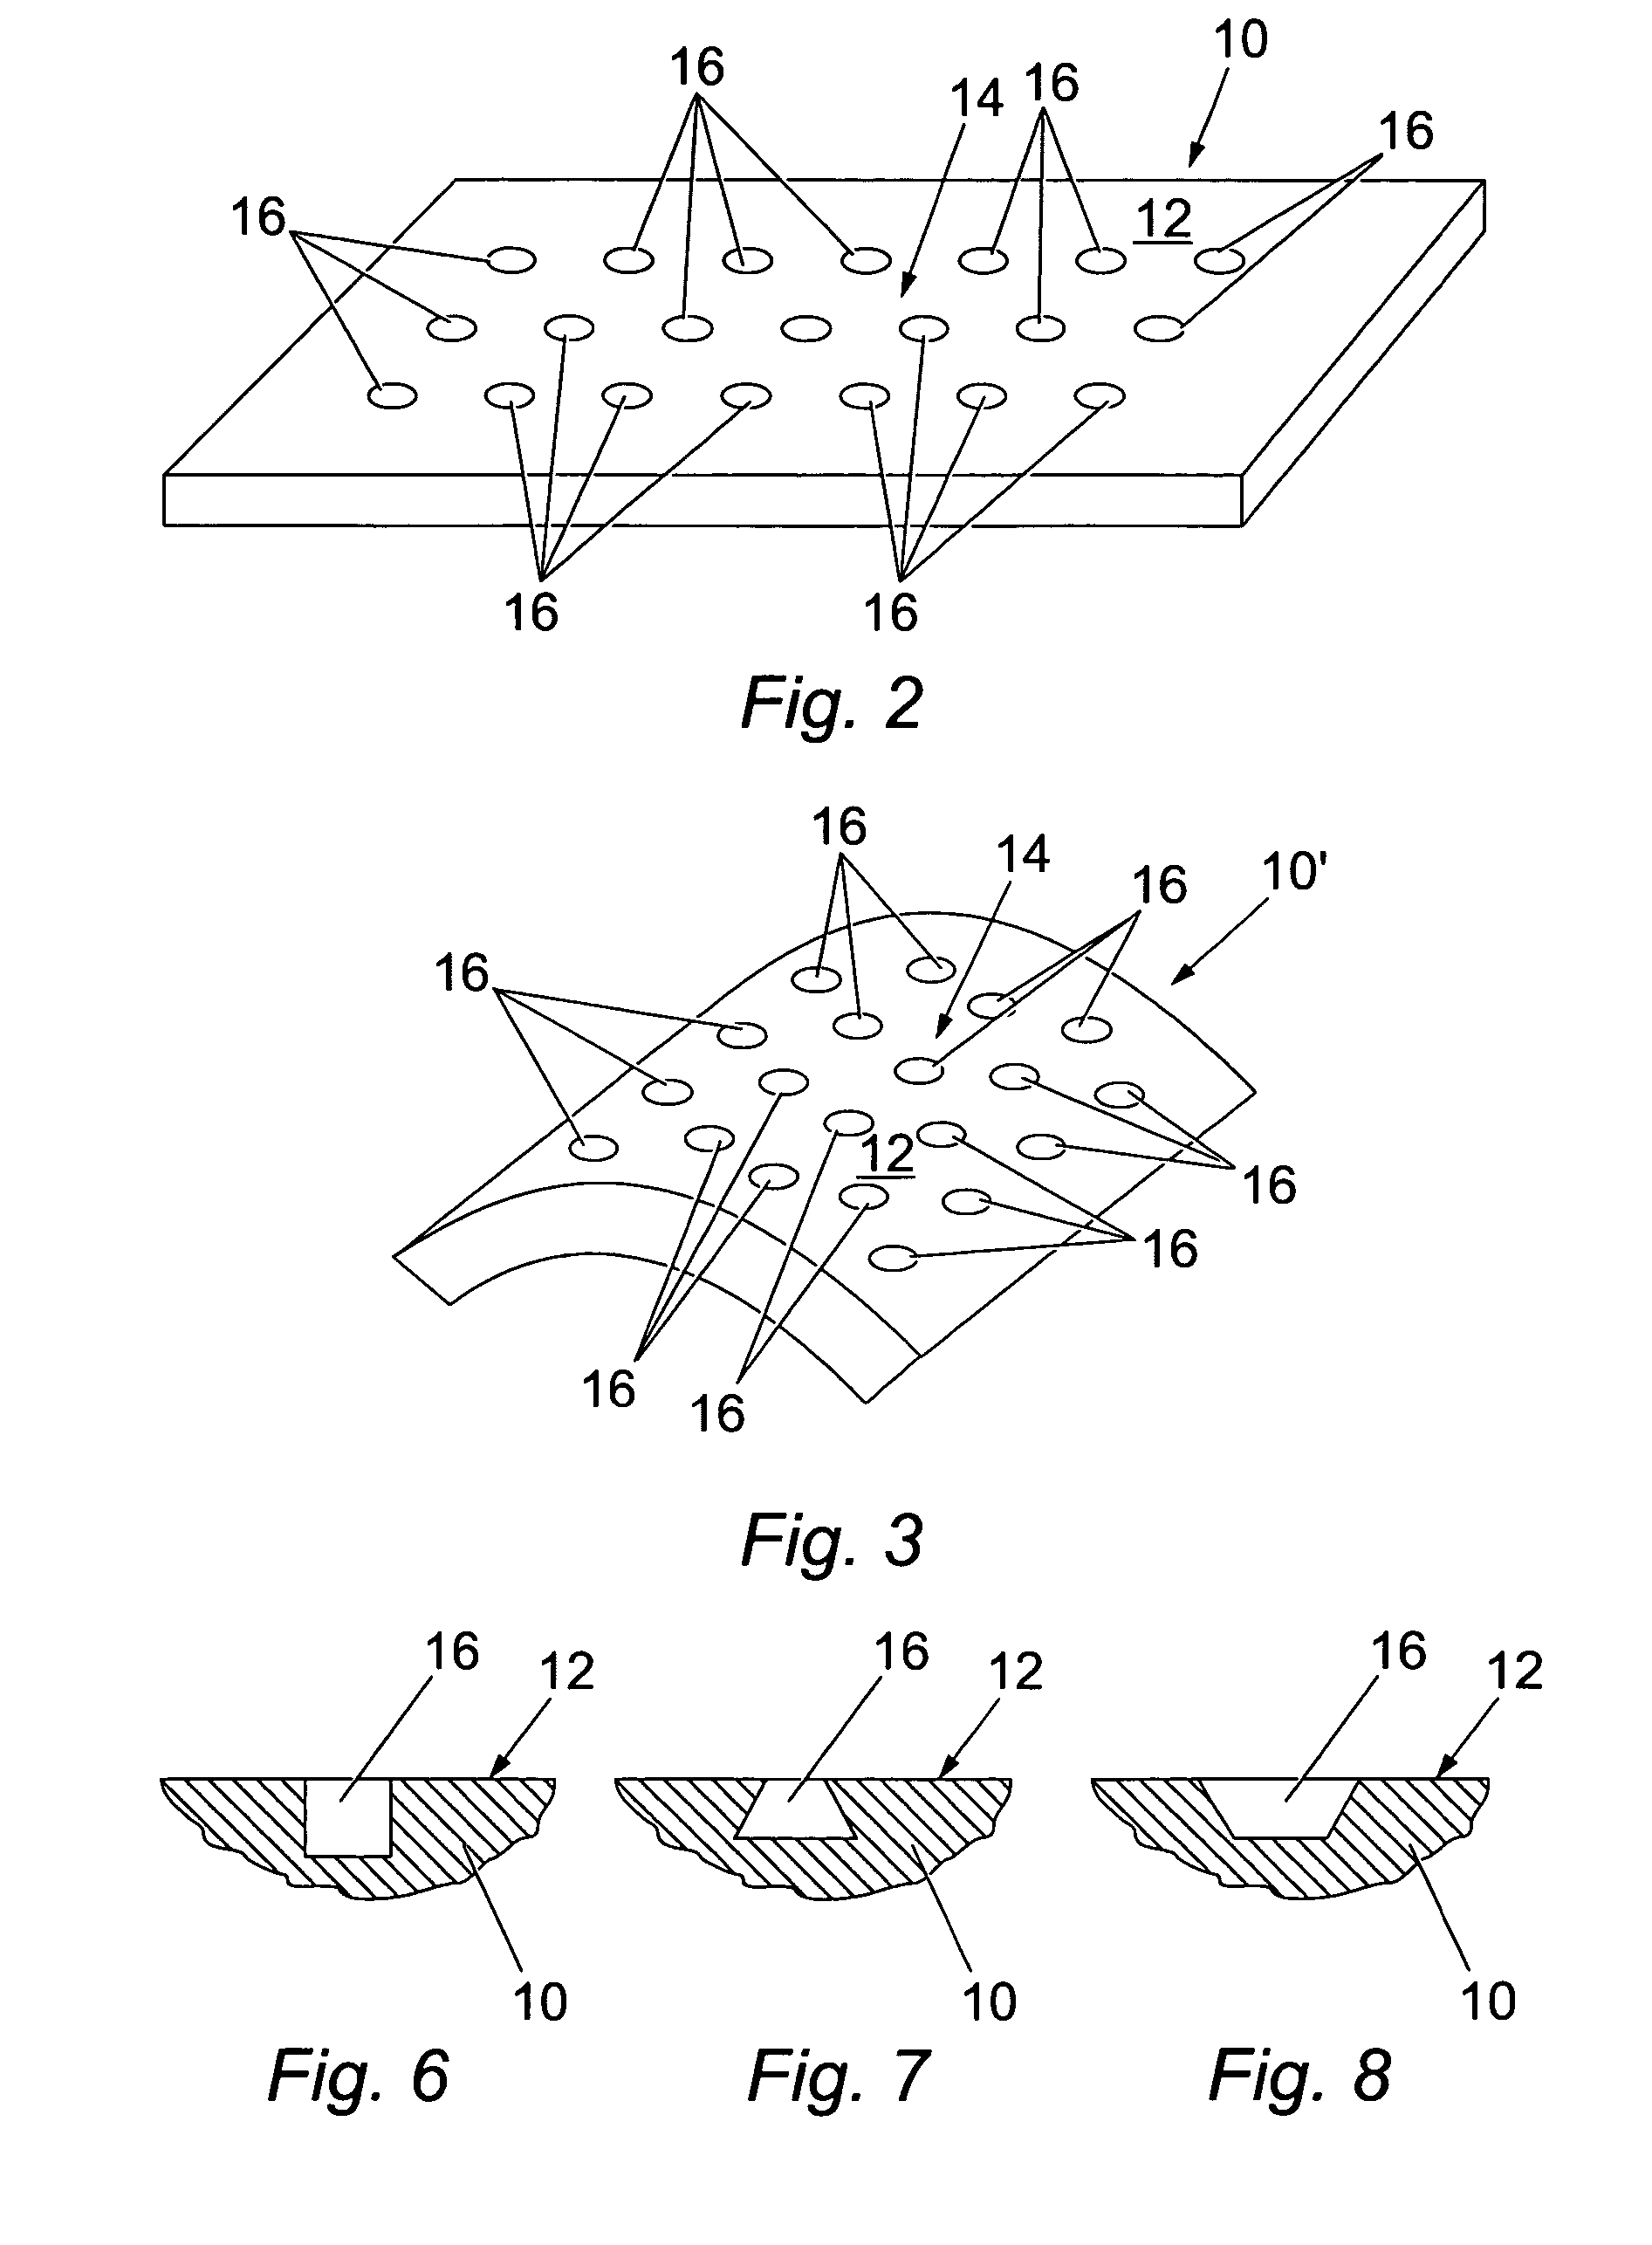 Cooling arrangement and method with selected surfaces configured to inhibit changes in boiling state